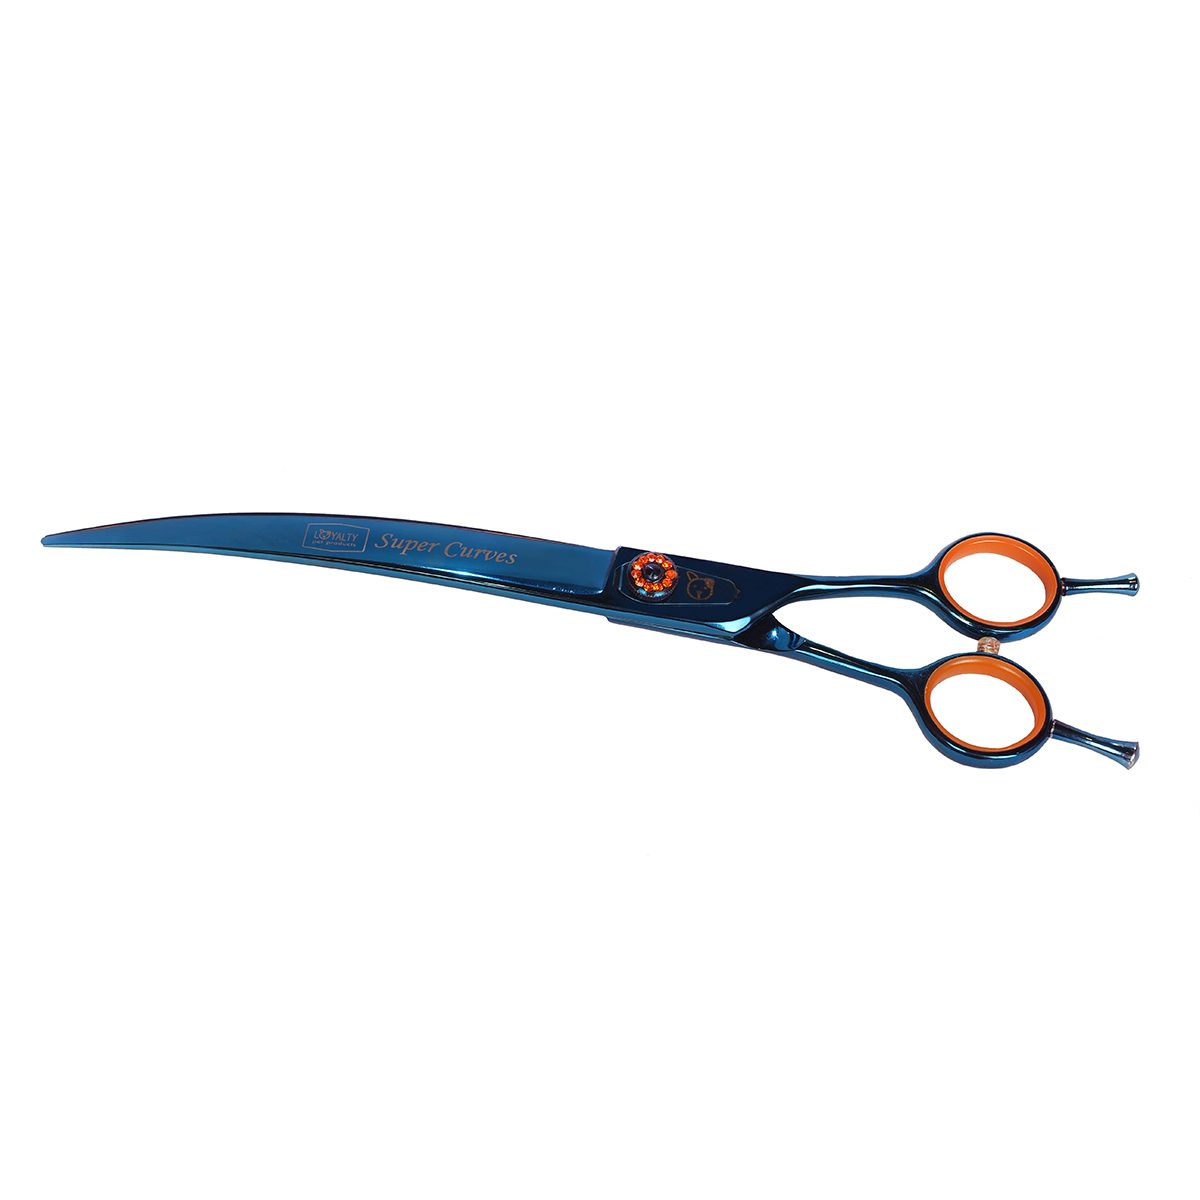 https://loyaltypetproducts.com/wp-content/uploads/super-curves-grooming-shears-1200x1200-1.jpg